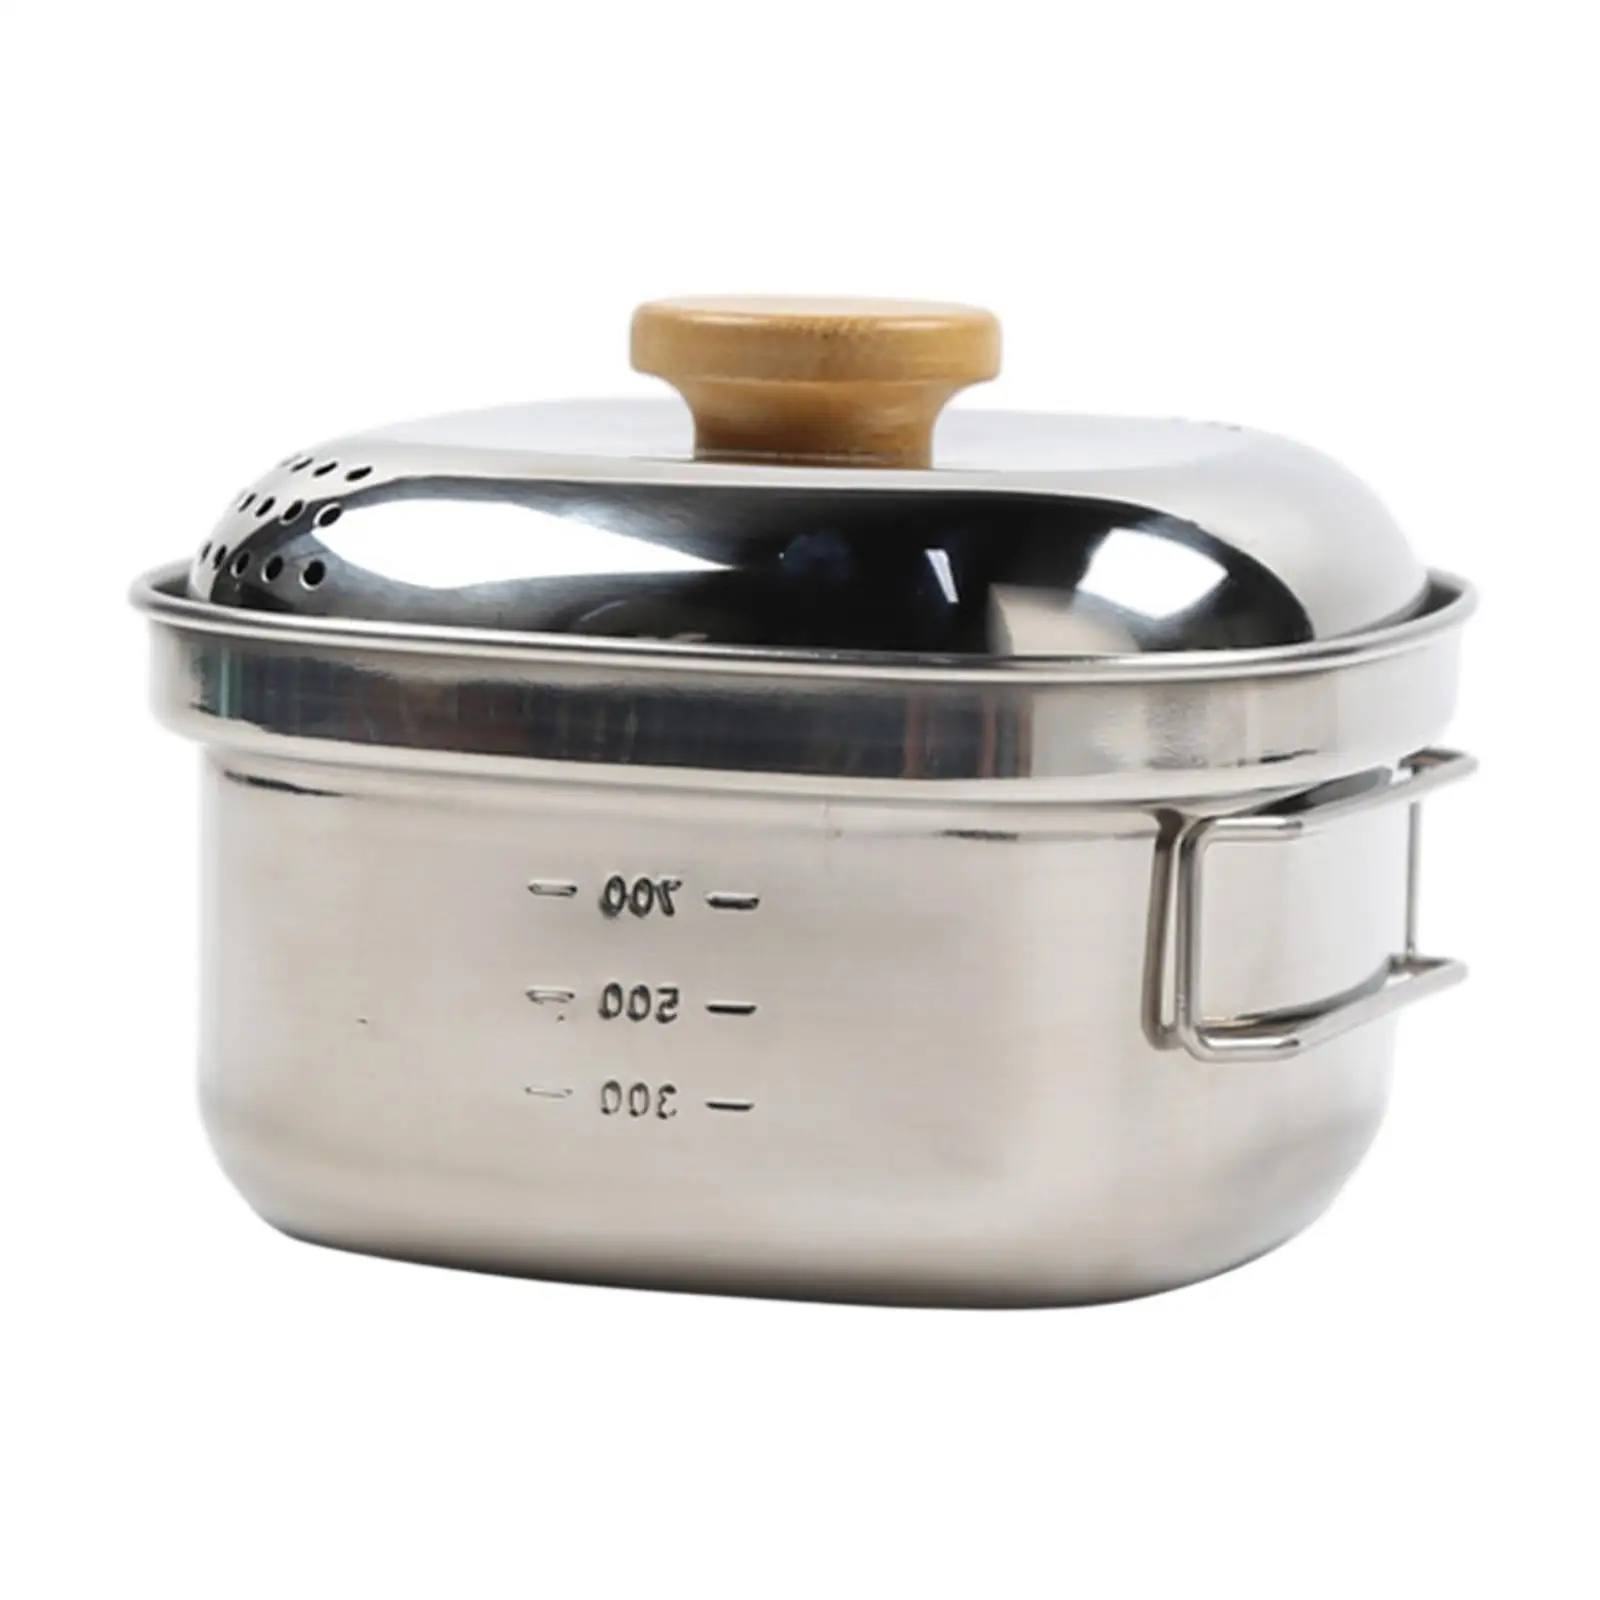 Camping Cook Pot 1.3L with Foldable Handle Small Cooking Pot Outdoor Pot for Camping Outdoor Activities Picnic Hiking Indoor